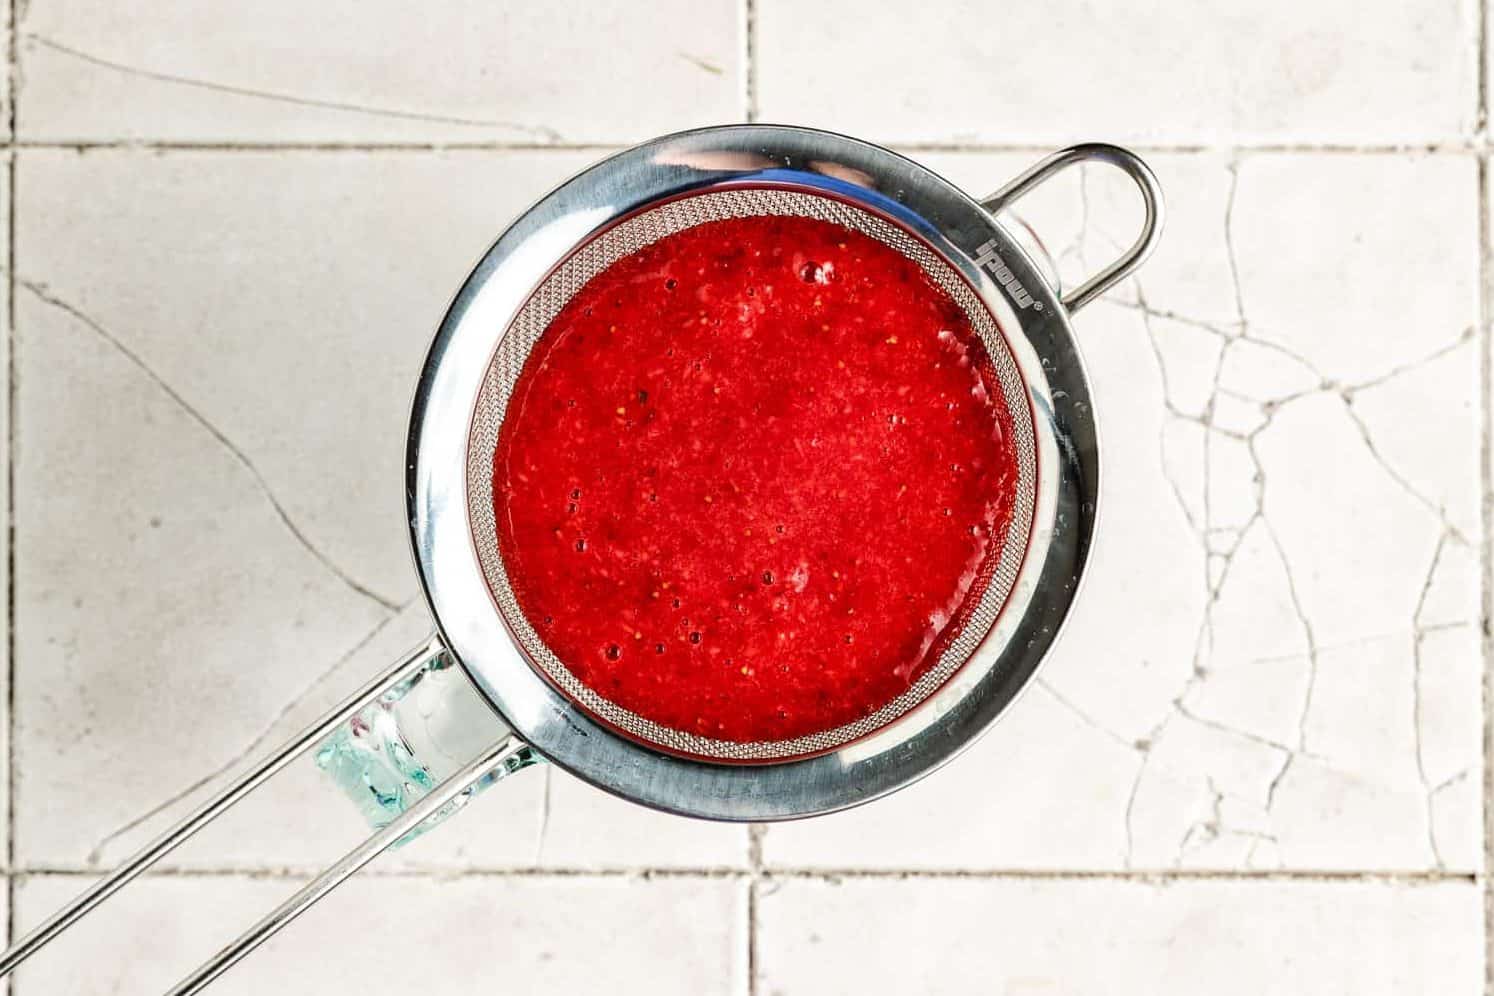 Strawberry puree poured into a mesh sieve.